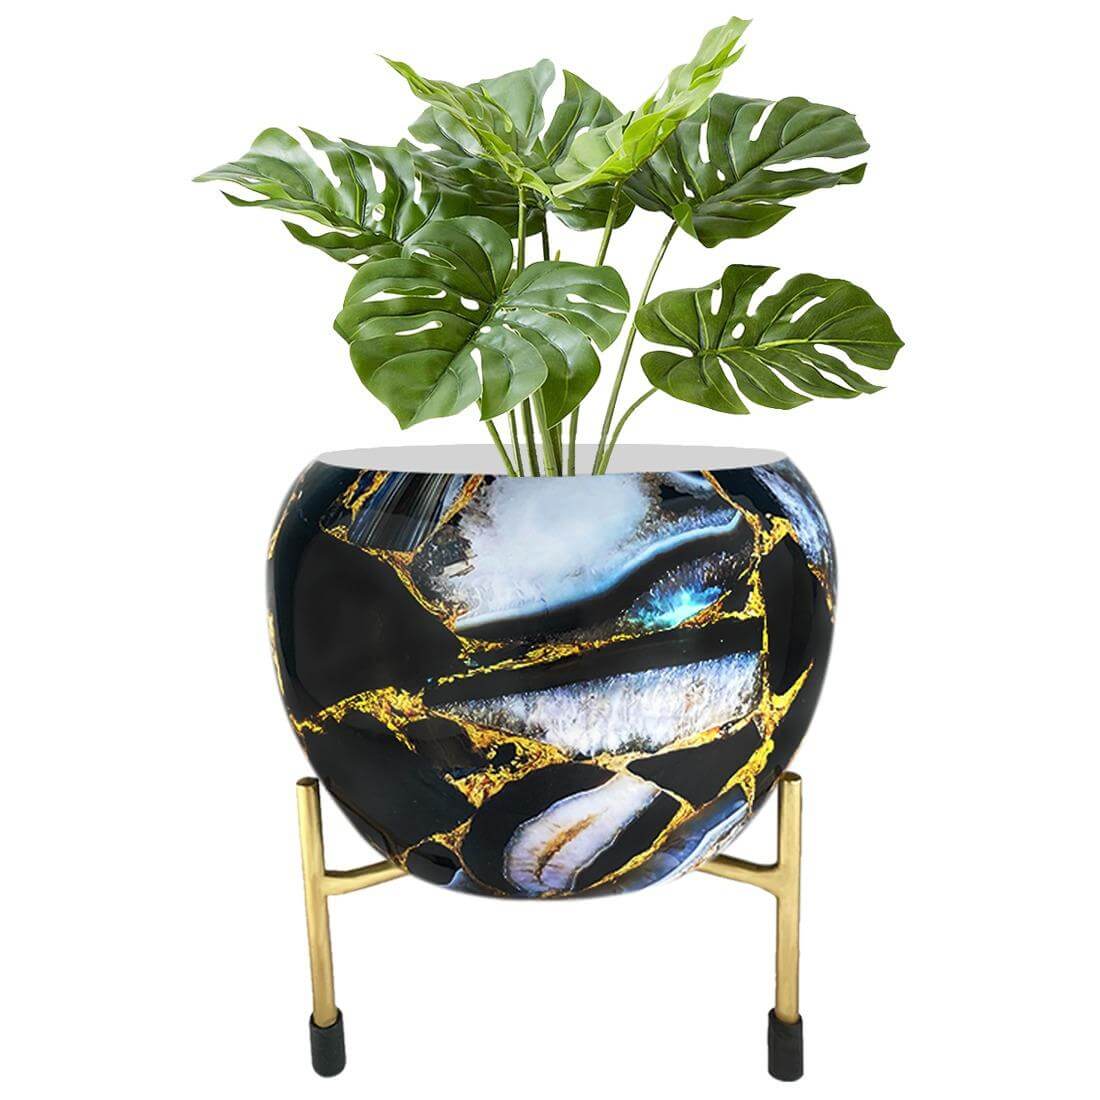 APPLE DESIGN FLOWER POT BLACK MARBLE WITH STAND